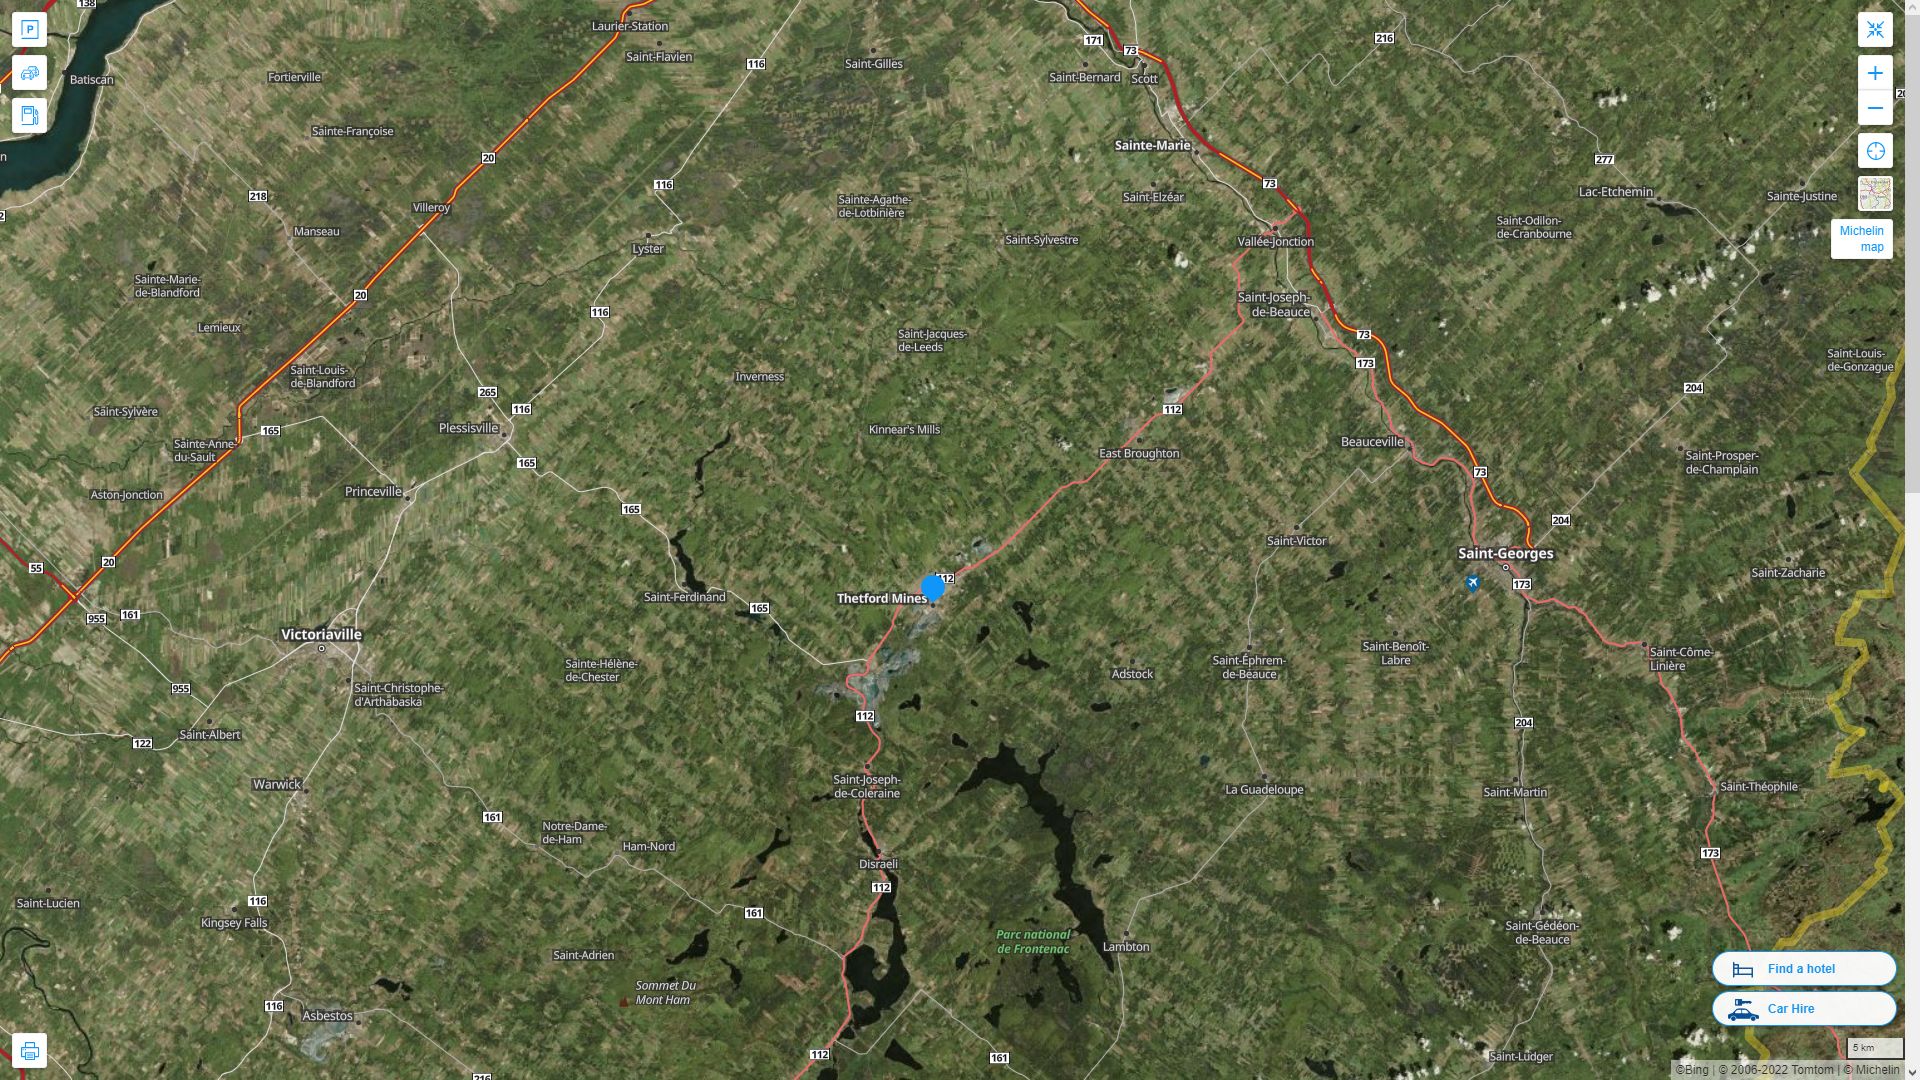 Thetford Mines Highway and Road Map with Satellite View